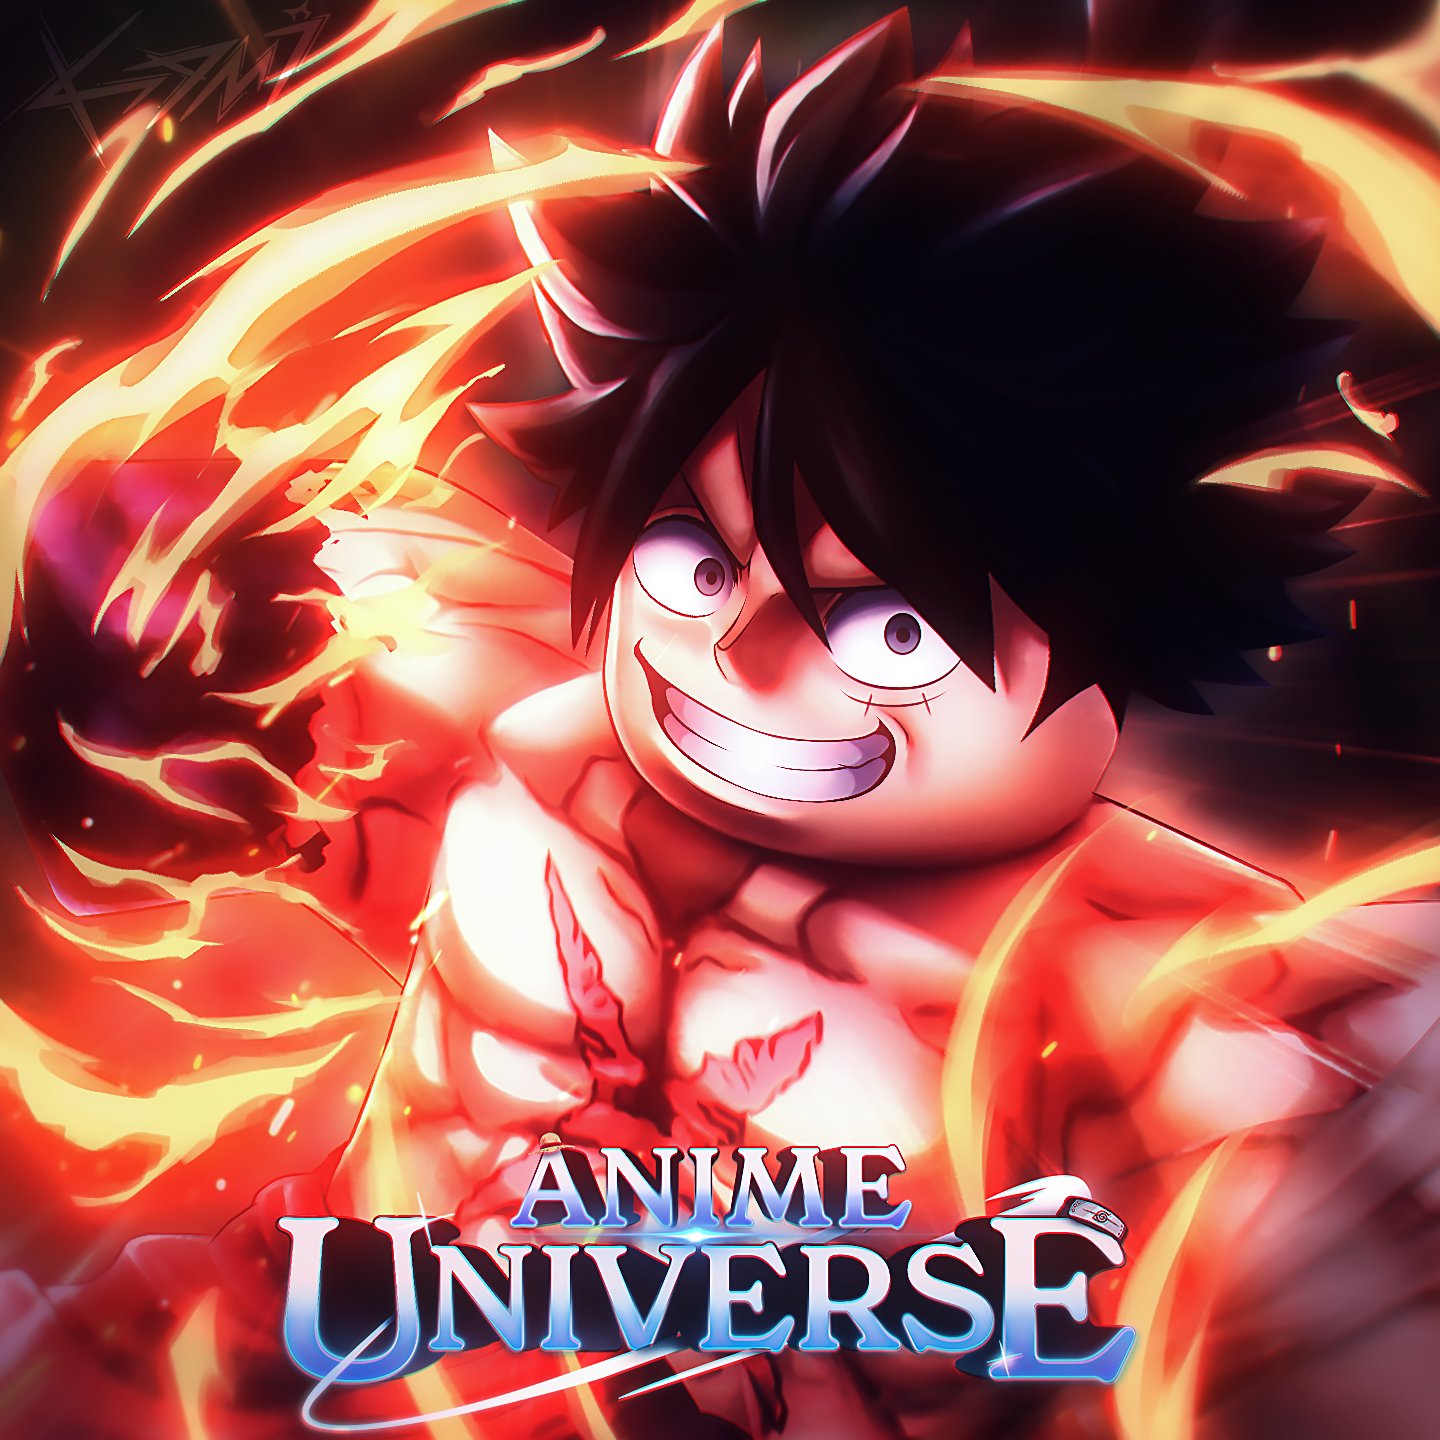 Okeoki on X: Luffy- - Commission form iEdu｜PU#2932 (Discord) - See my Gfx  gallery at  - Likes and Retweets are appreciated!  ^_^ #RobloxGFXC #Roblox #robloxart #RobloxDev #robloxGFX   / X